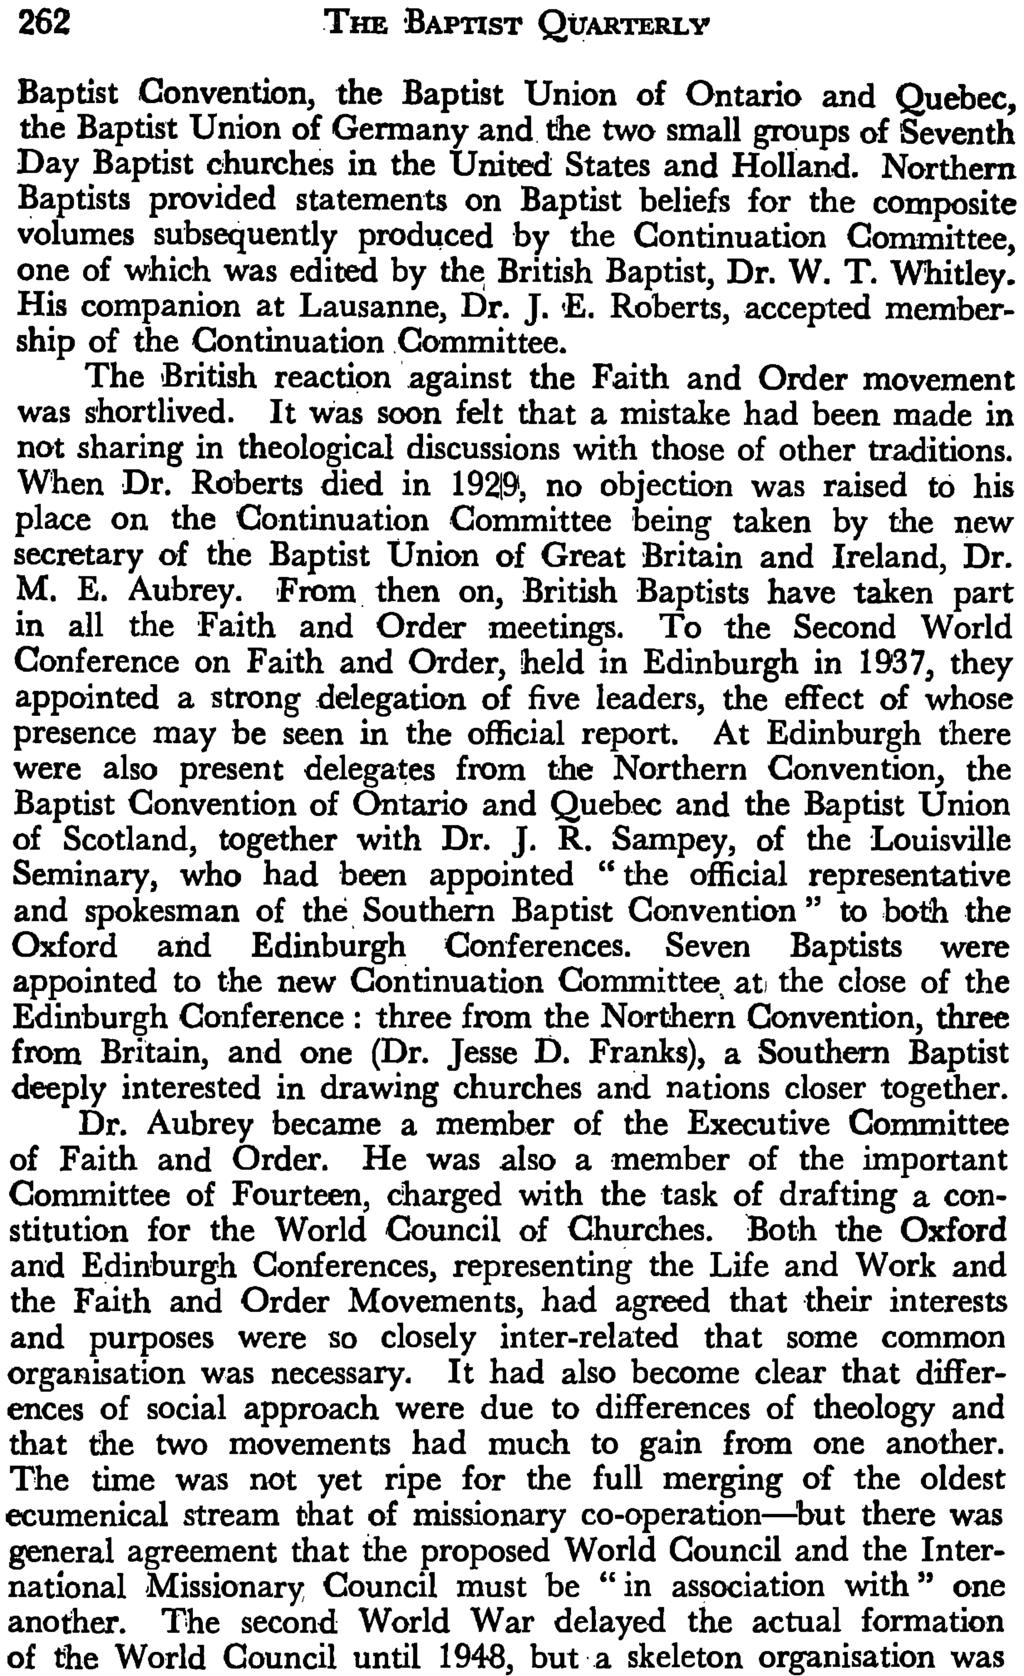 262 THE BAPTIST QUARTERLY Baptist Convention, the Baptist Union of Ontario and Quebec, the Baptist Union of Gennany and.